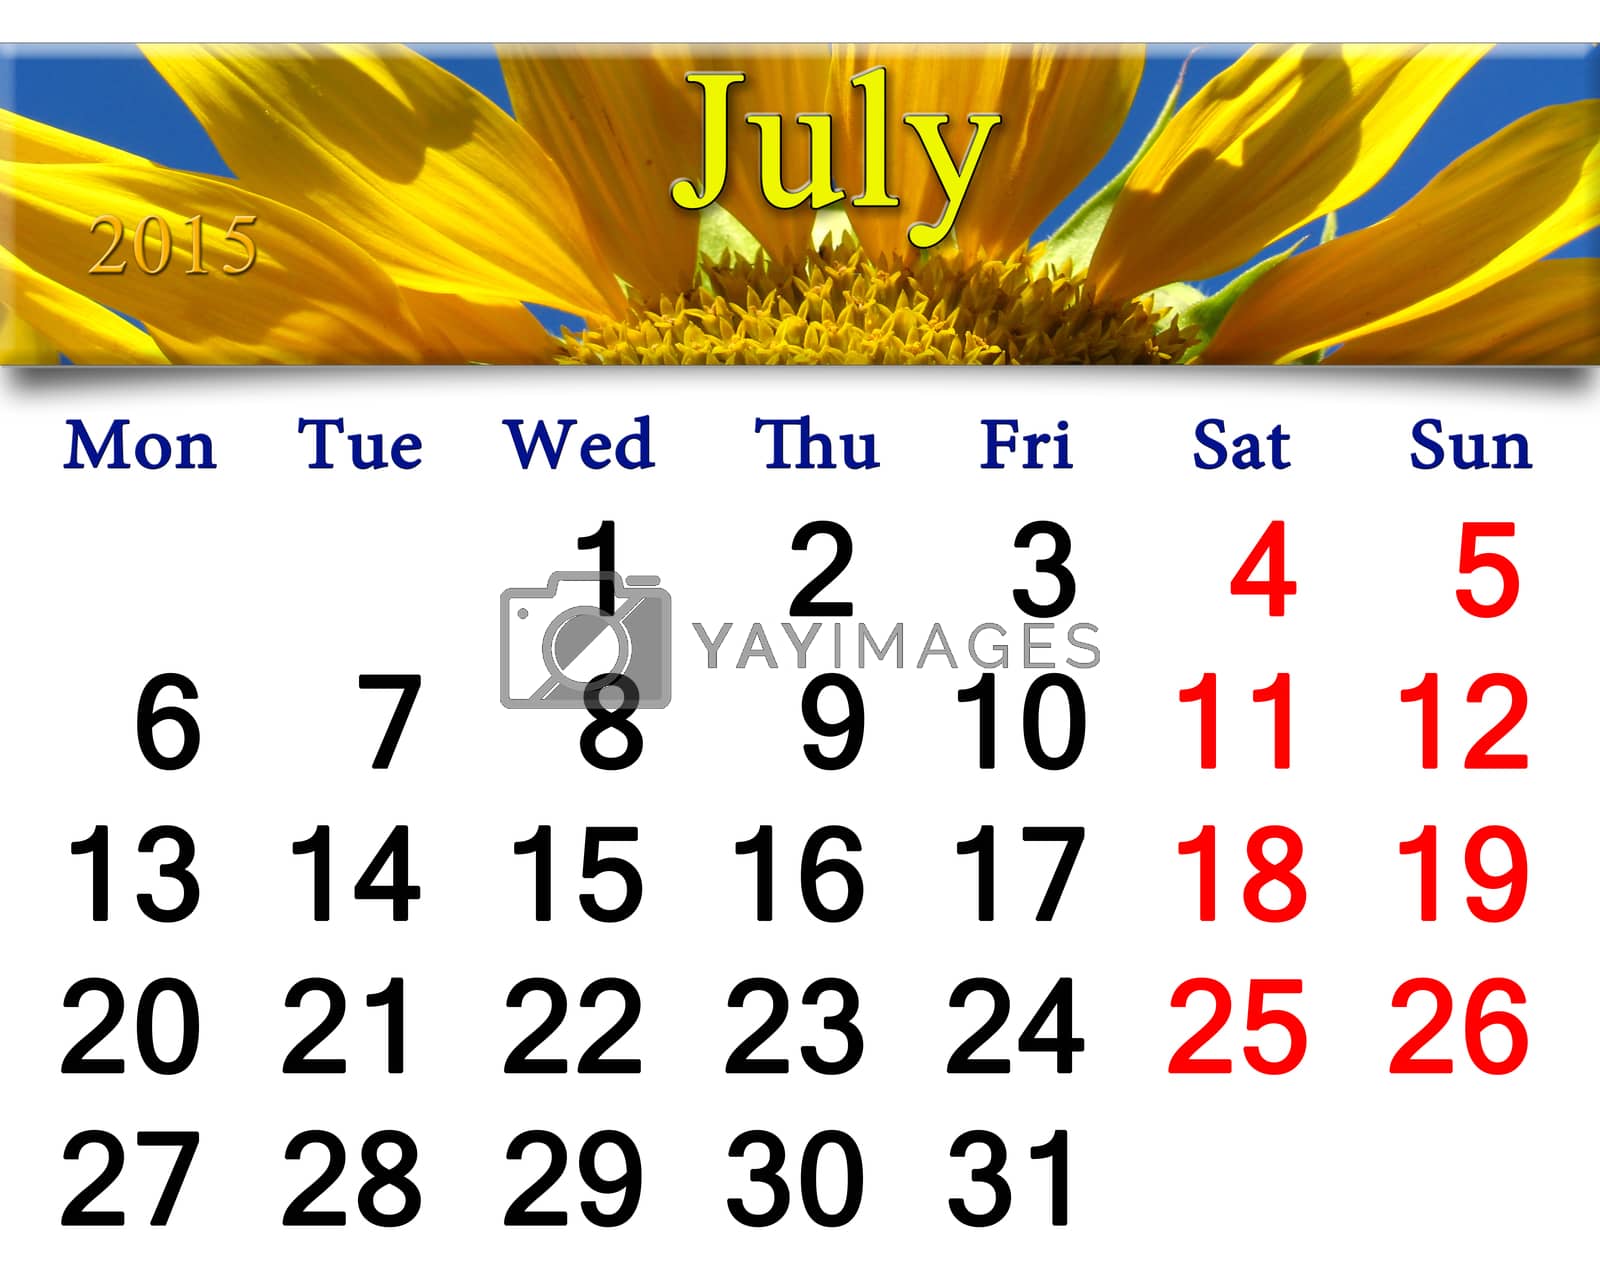 Royalty free image of calendar for 2015 year with big sunflower by alexmak